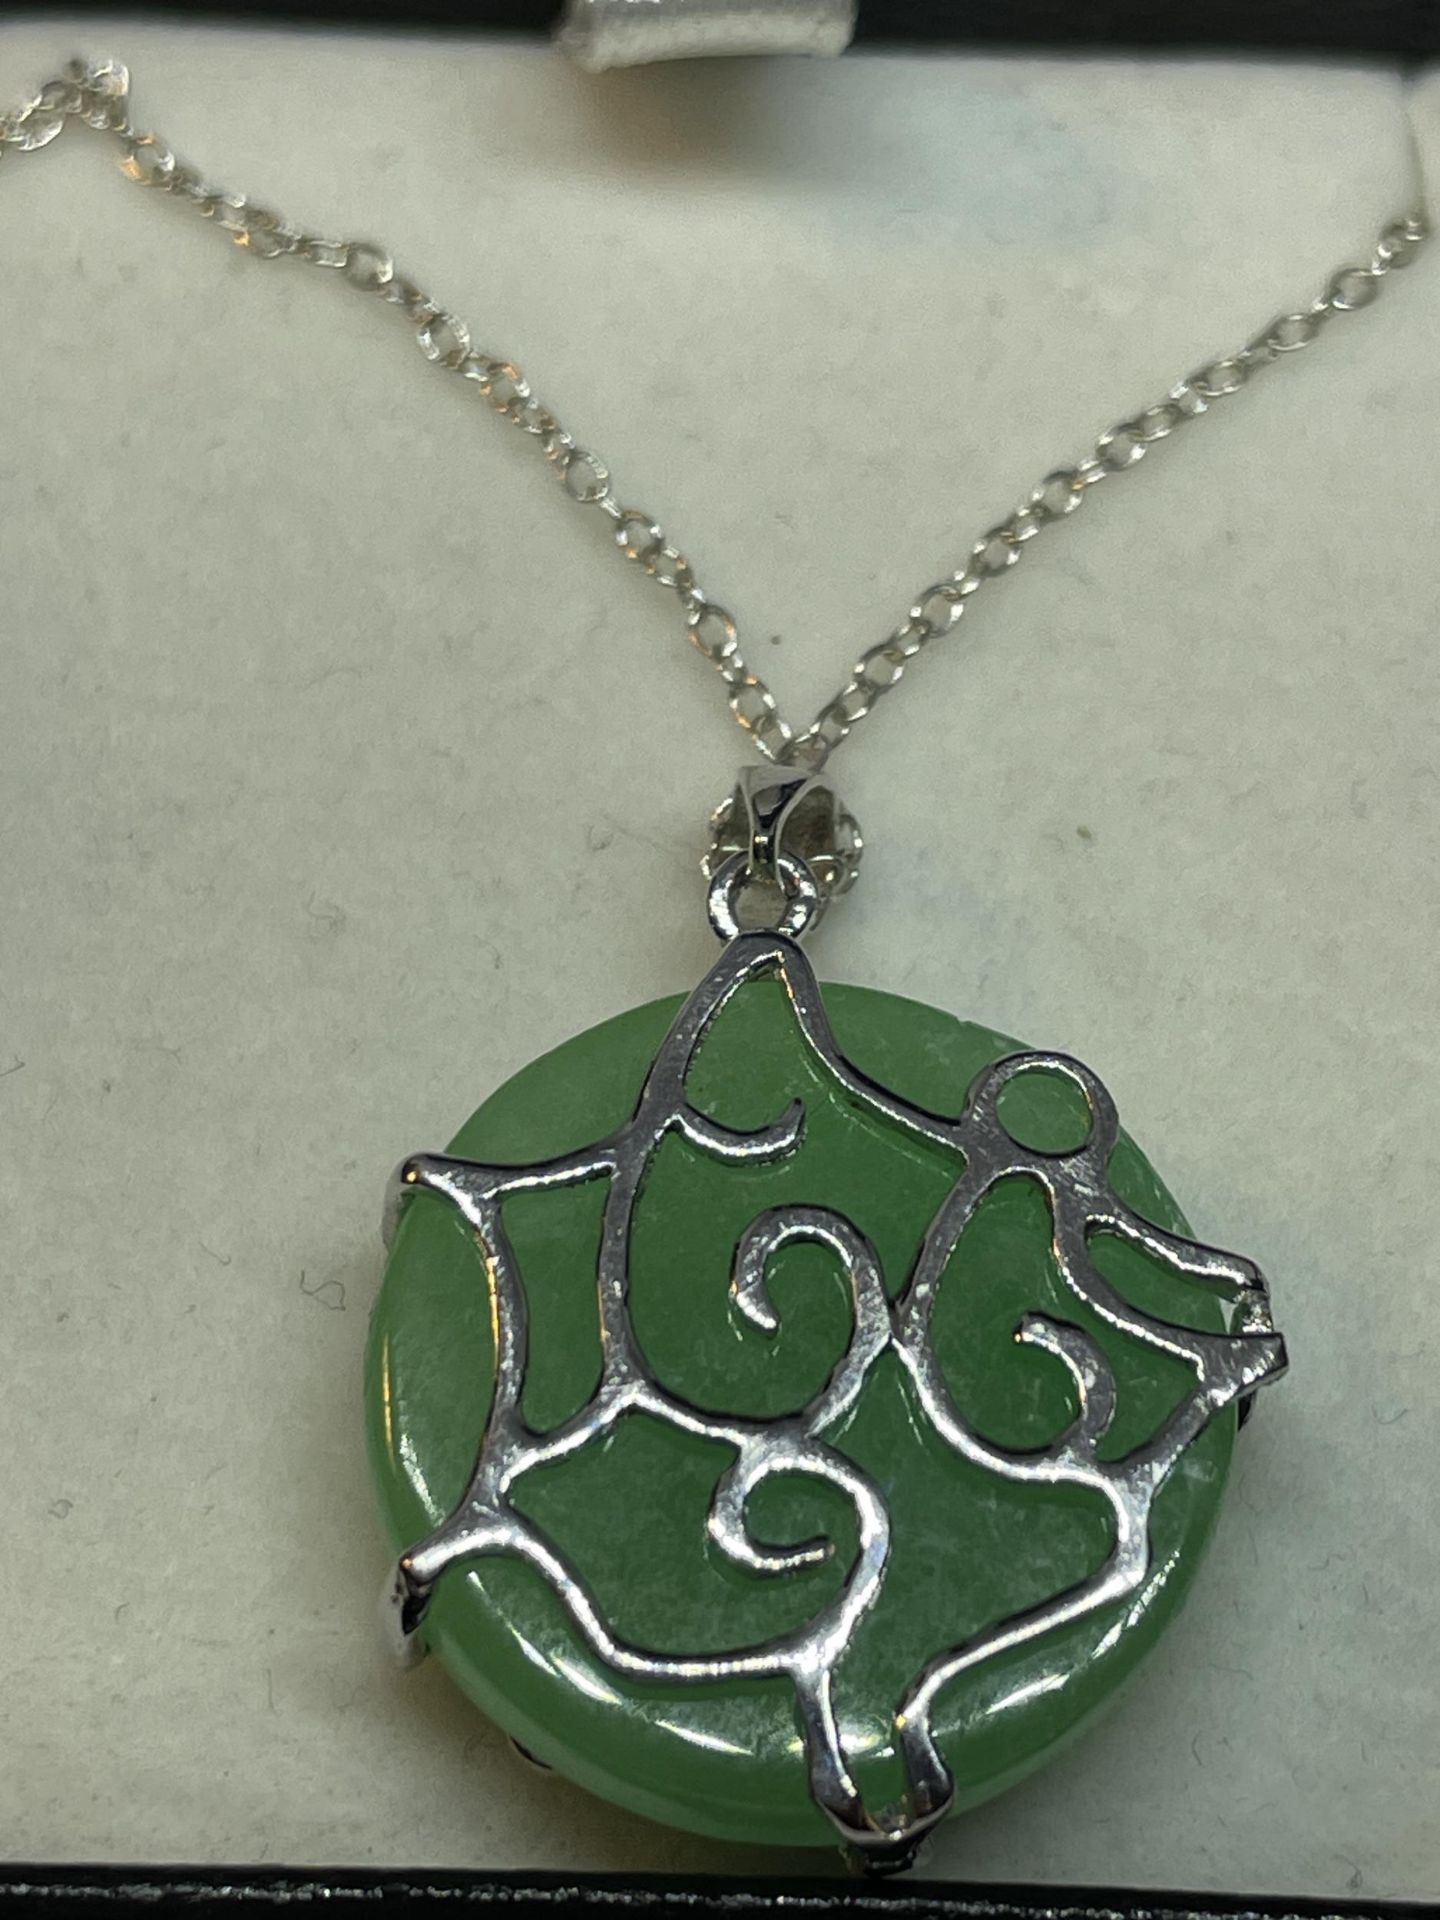 A SILVER AND JADE NECKLACE IN A PRESENTATION BOX - Image 2 of 3